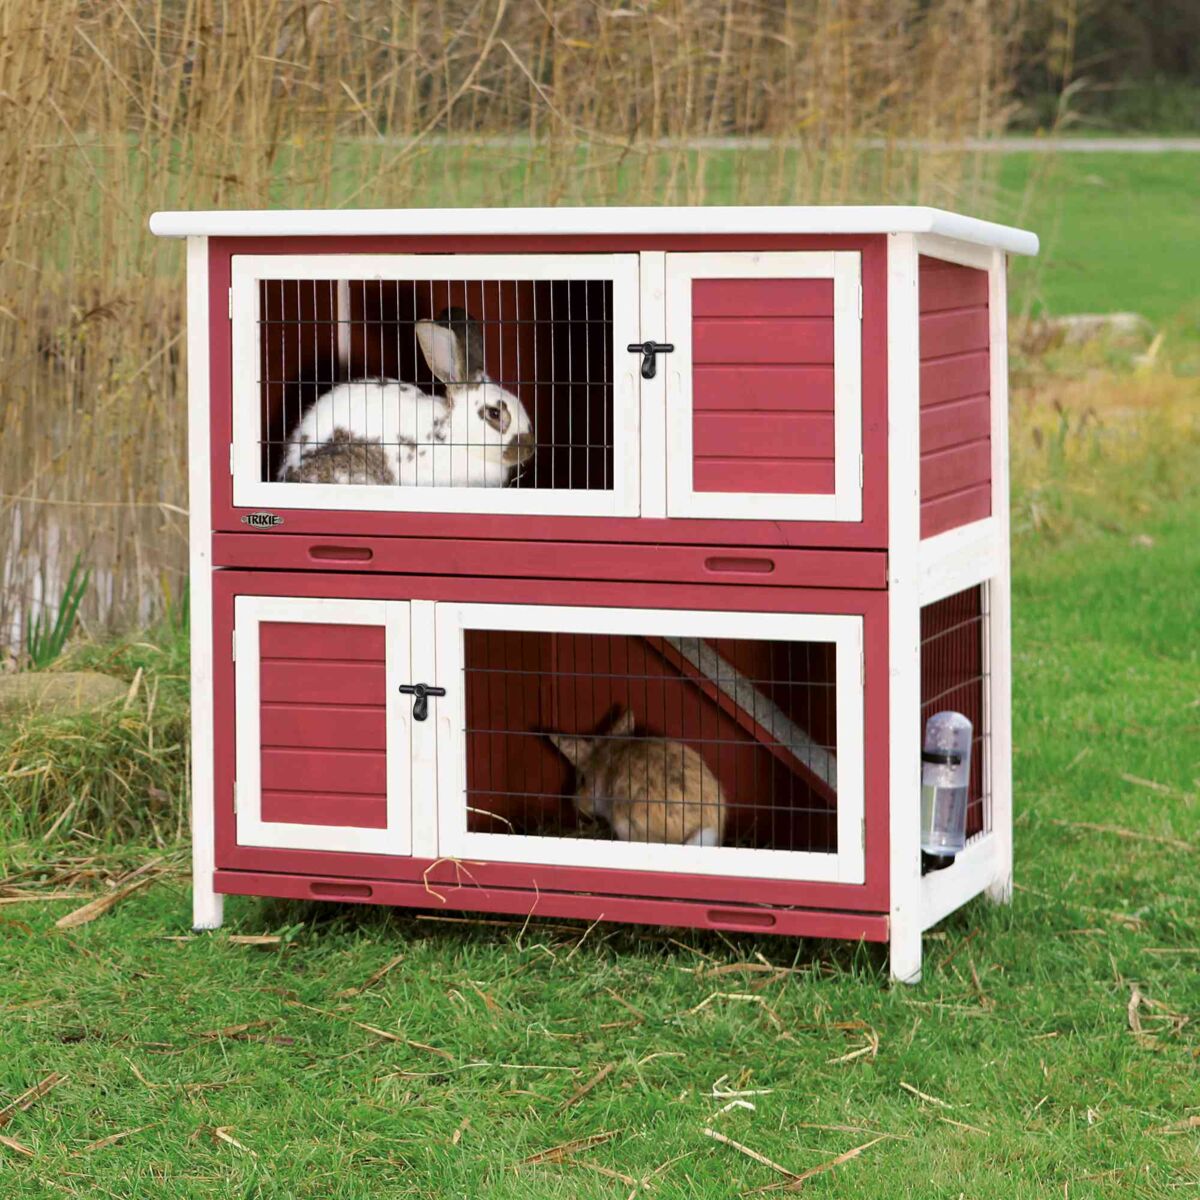 TRIXIE Pet Products Rabbit Hutch with a View 59.25 x 31.25 x 42 inches 